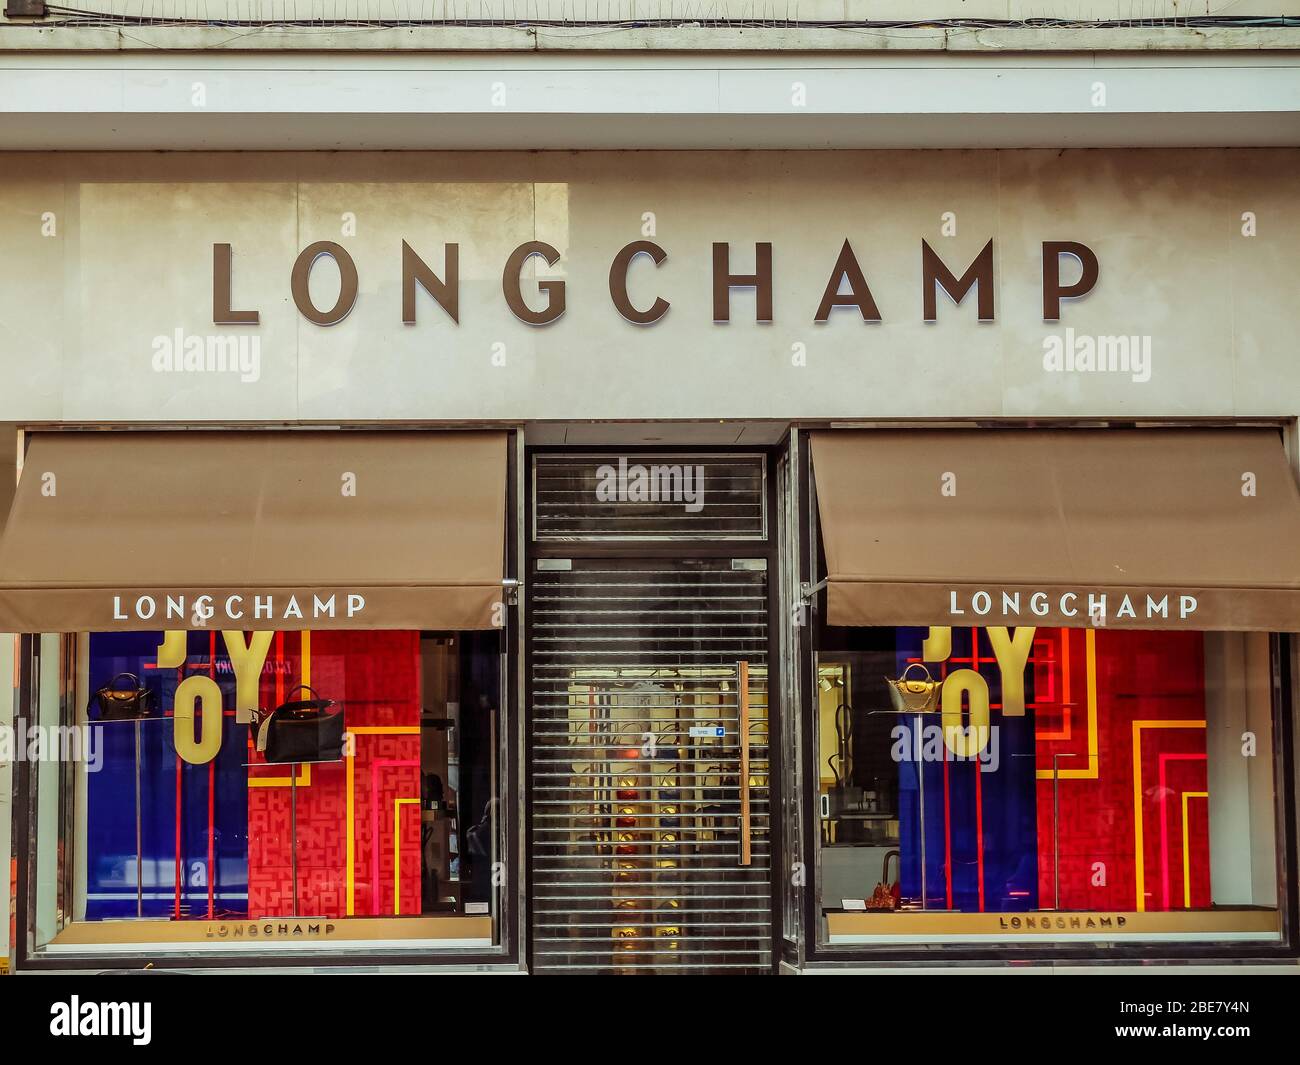 Longchamp Store - Paris Illustration of the logo and boutique of